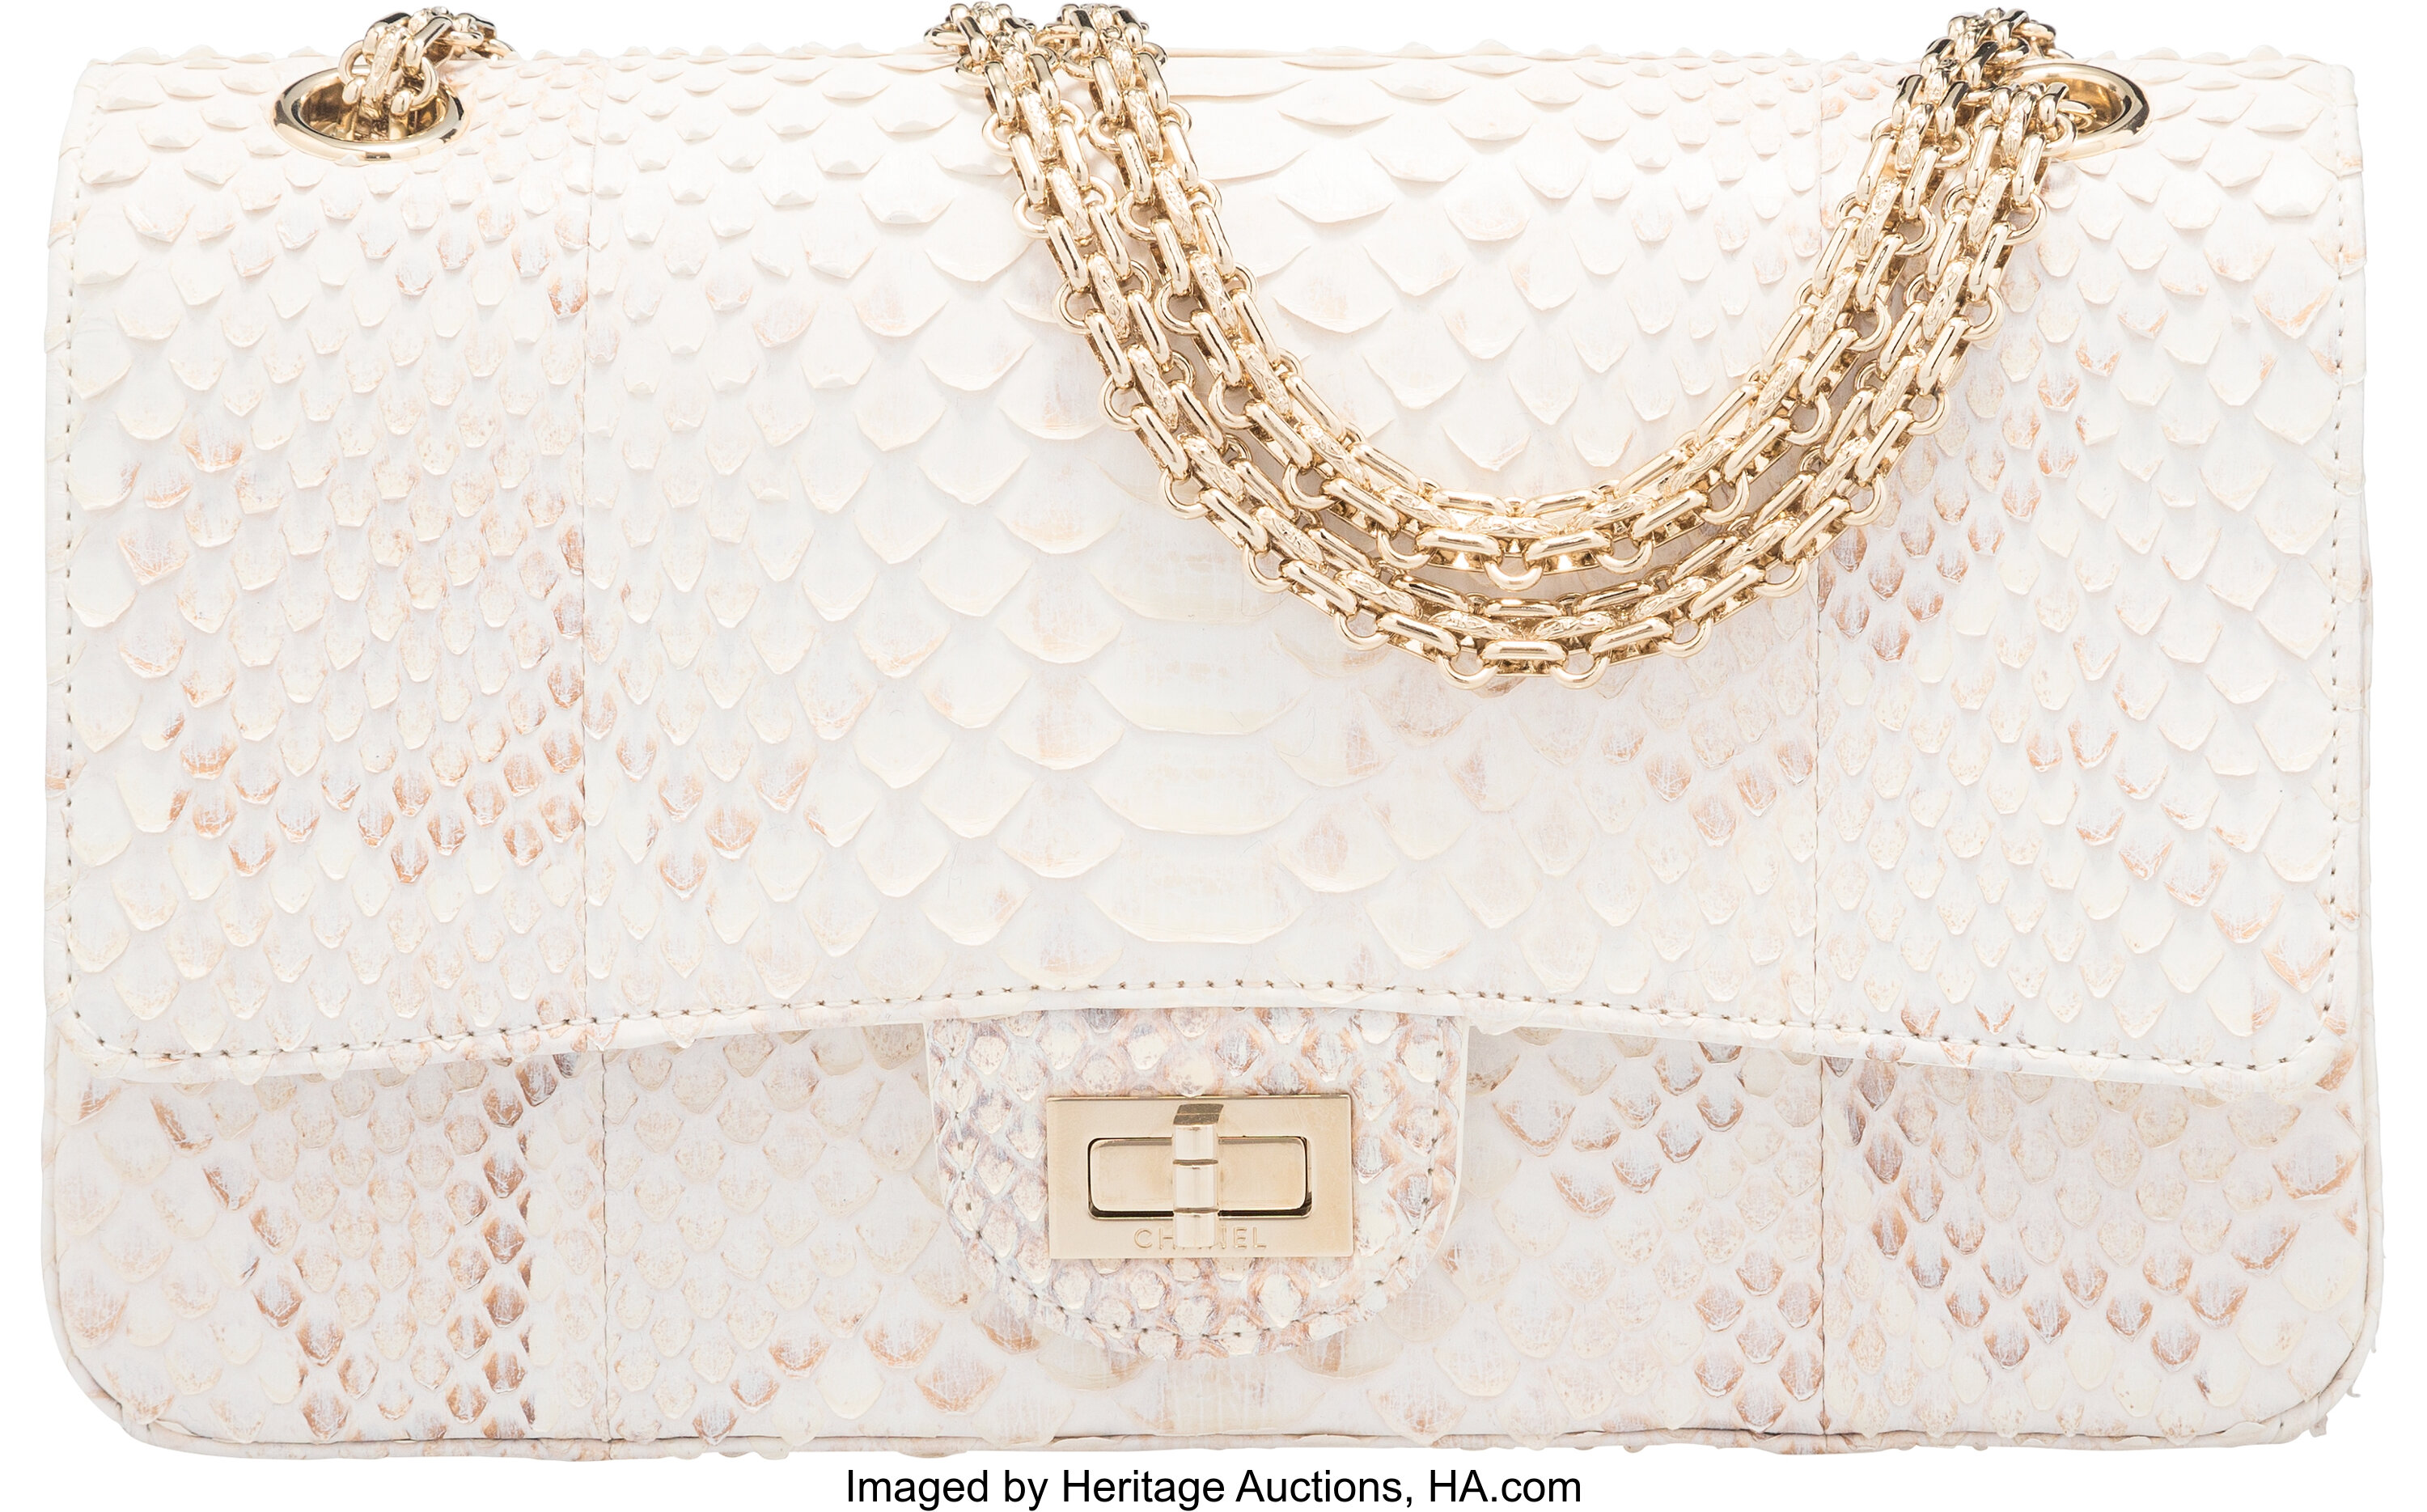 CHANEL Aged Calfskin Chevron Quilted 2.55 Reissue 225 Flap White